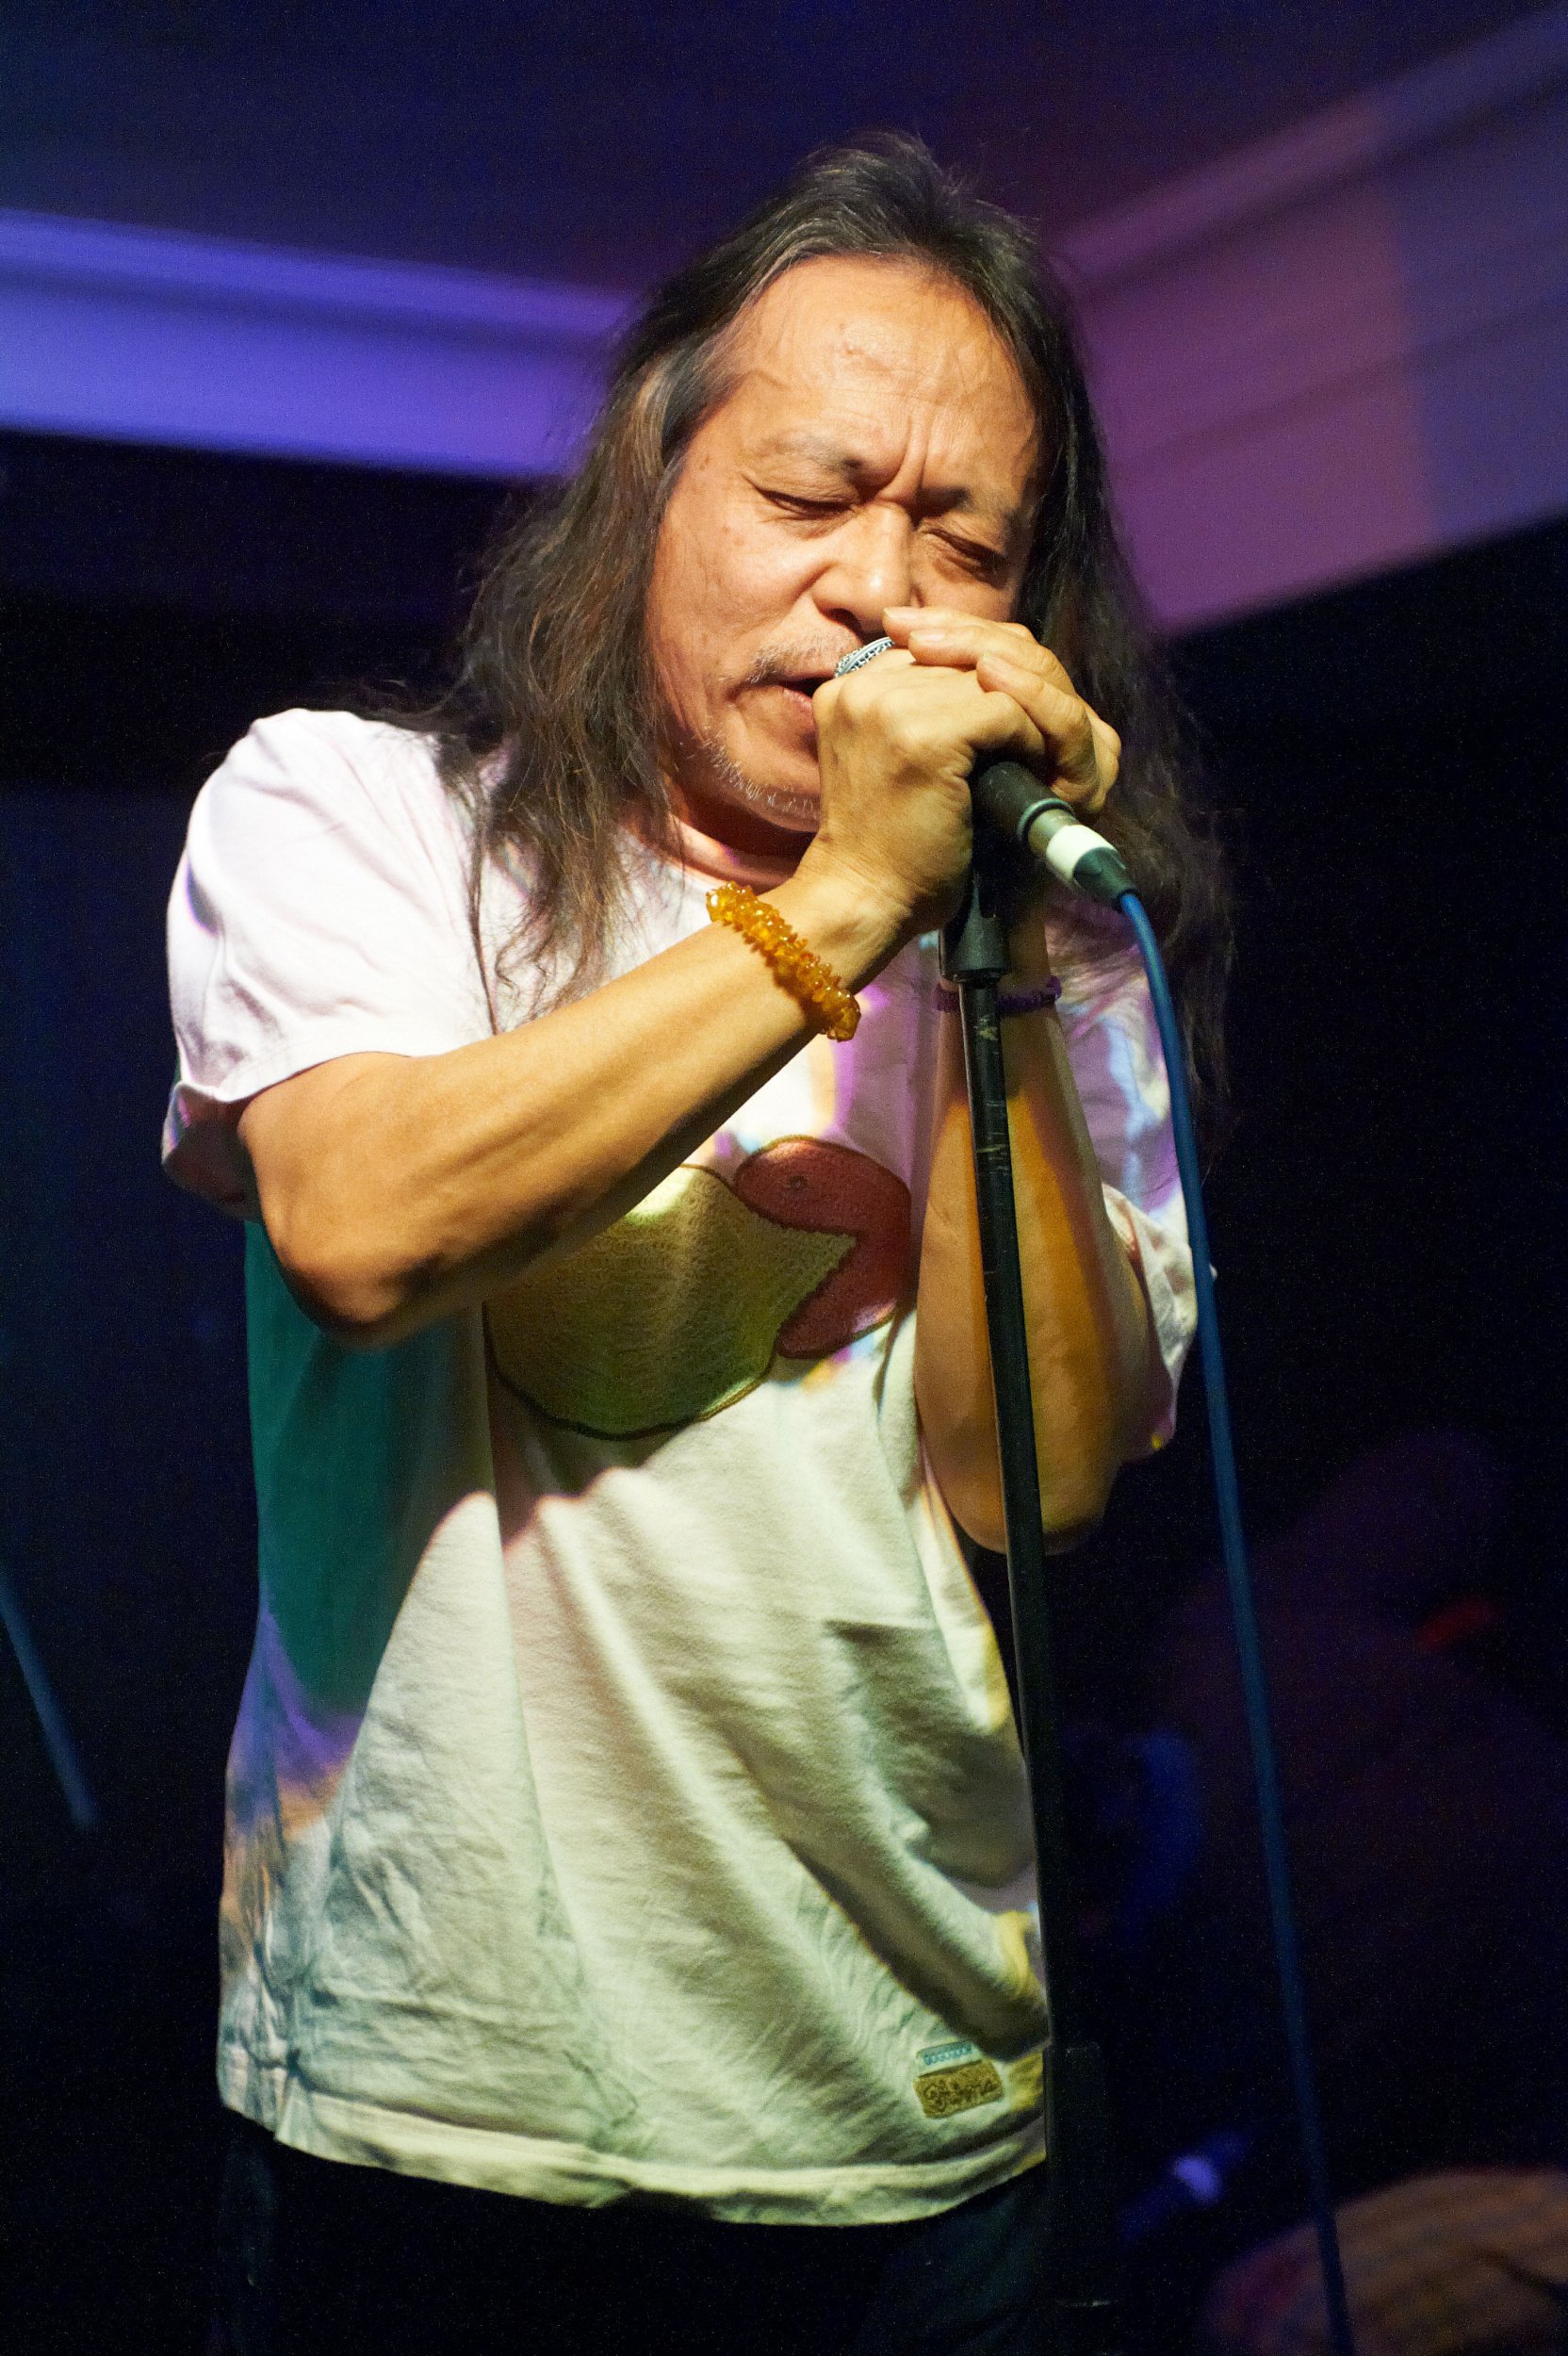 Damo Suzuki performs on stage at The Harley on December 9, 2010, in Sheffield, England